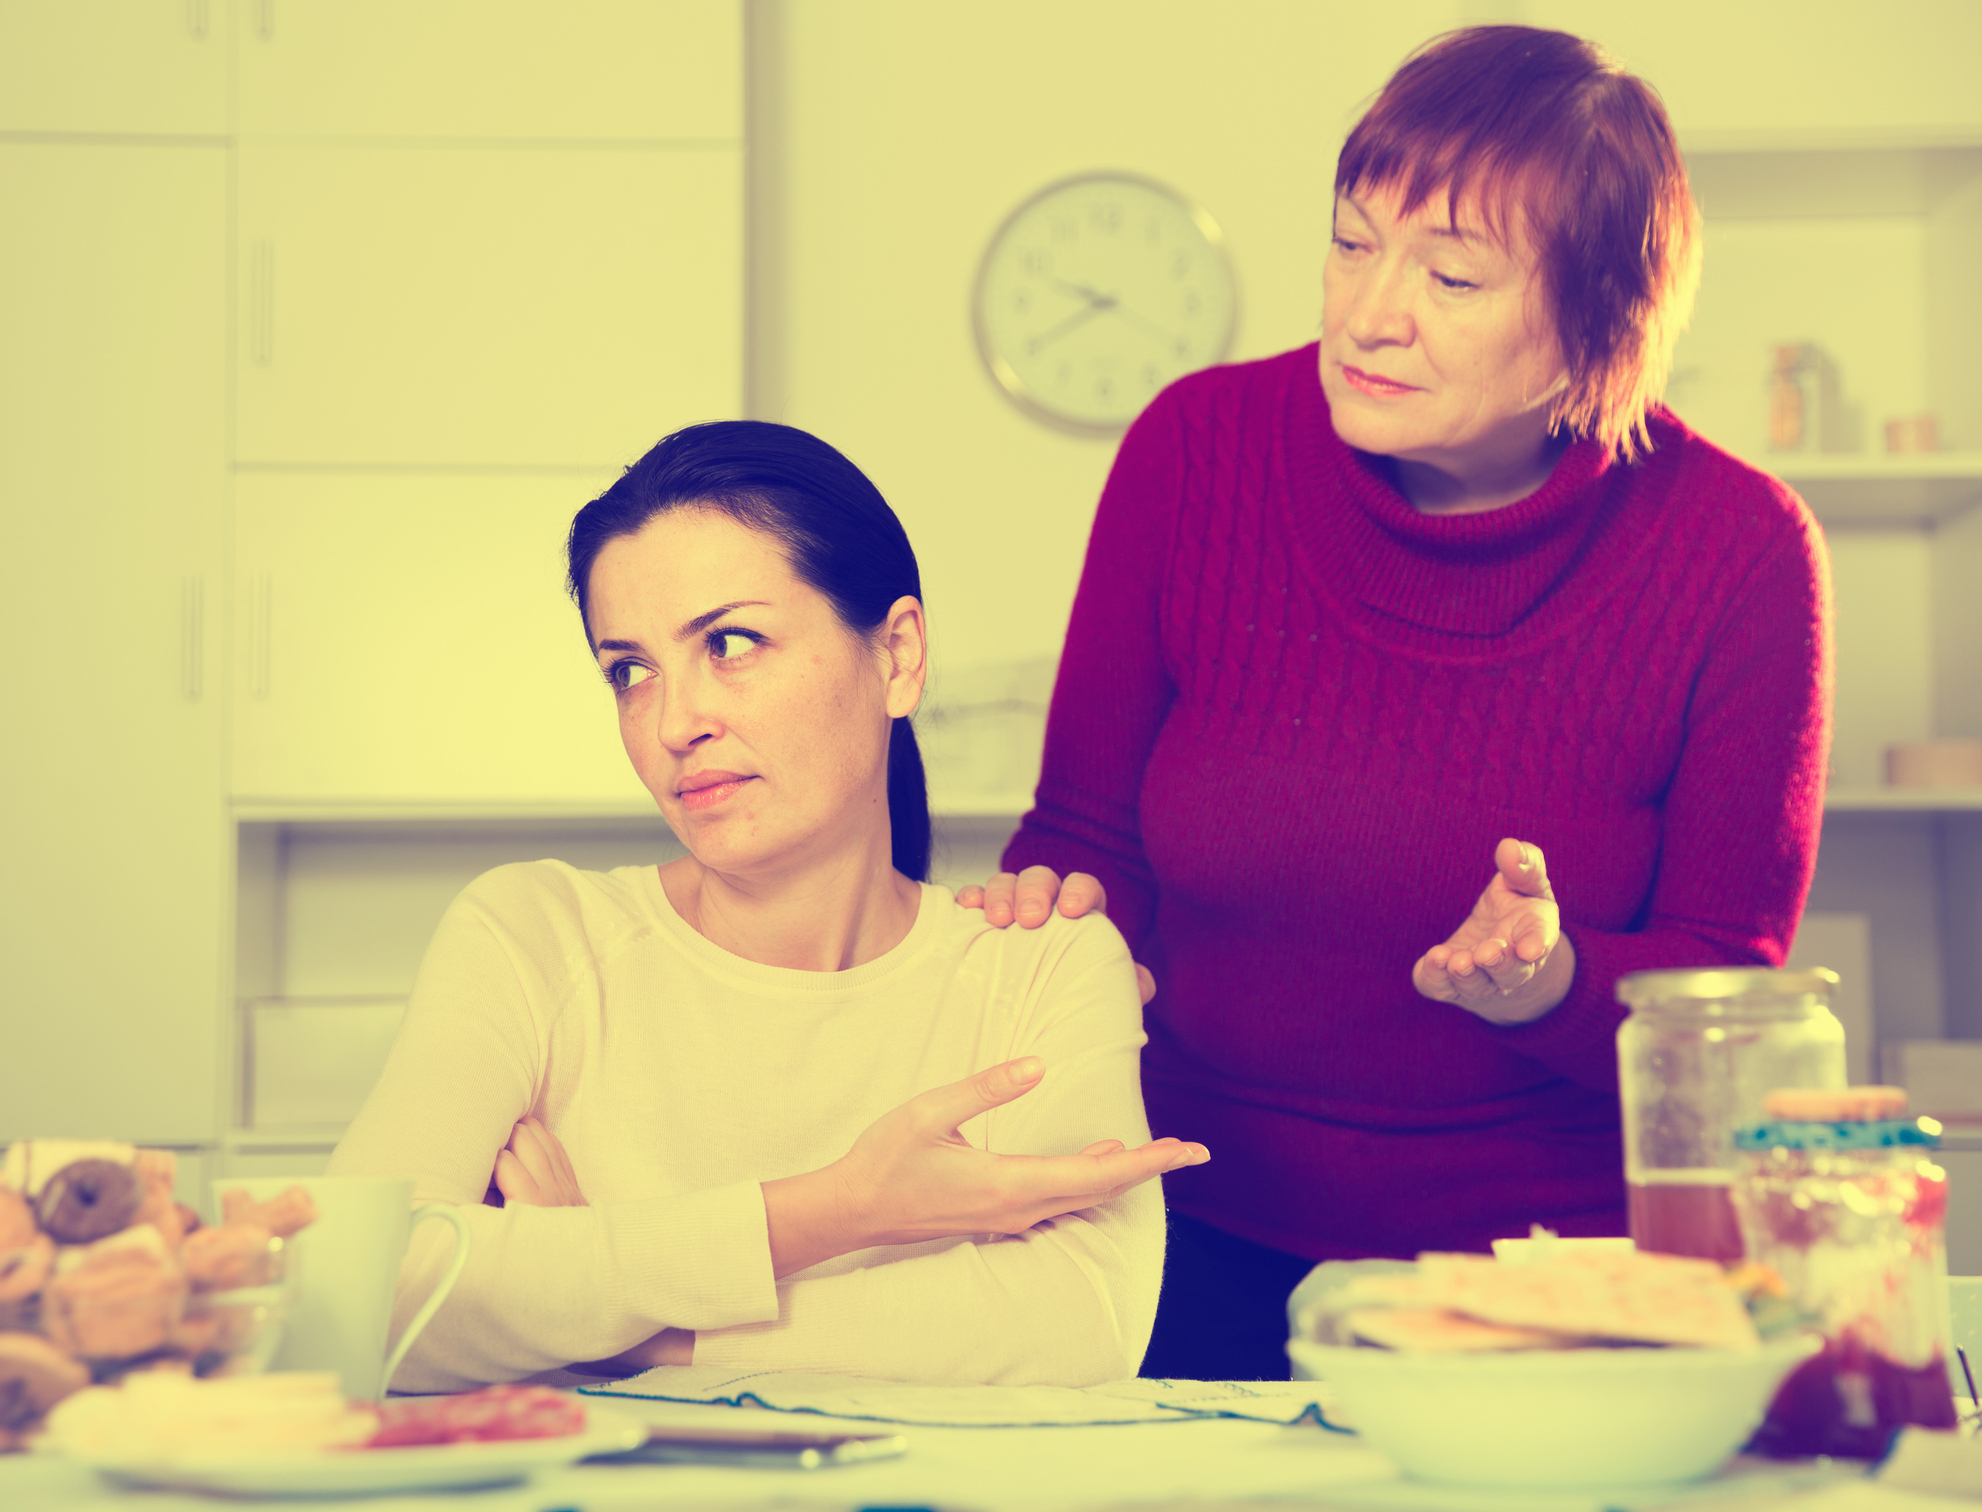 An adult daughter looking annoyed as her older mother gestures in a discussion at a kitchen table